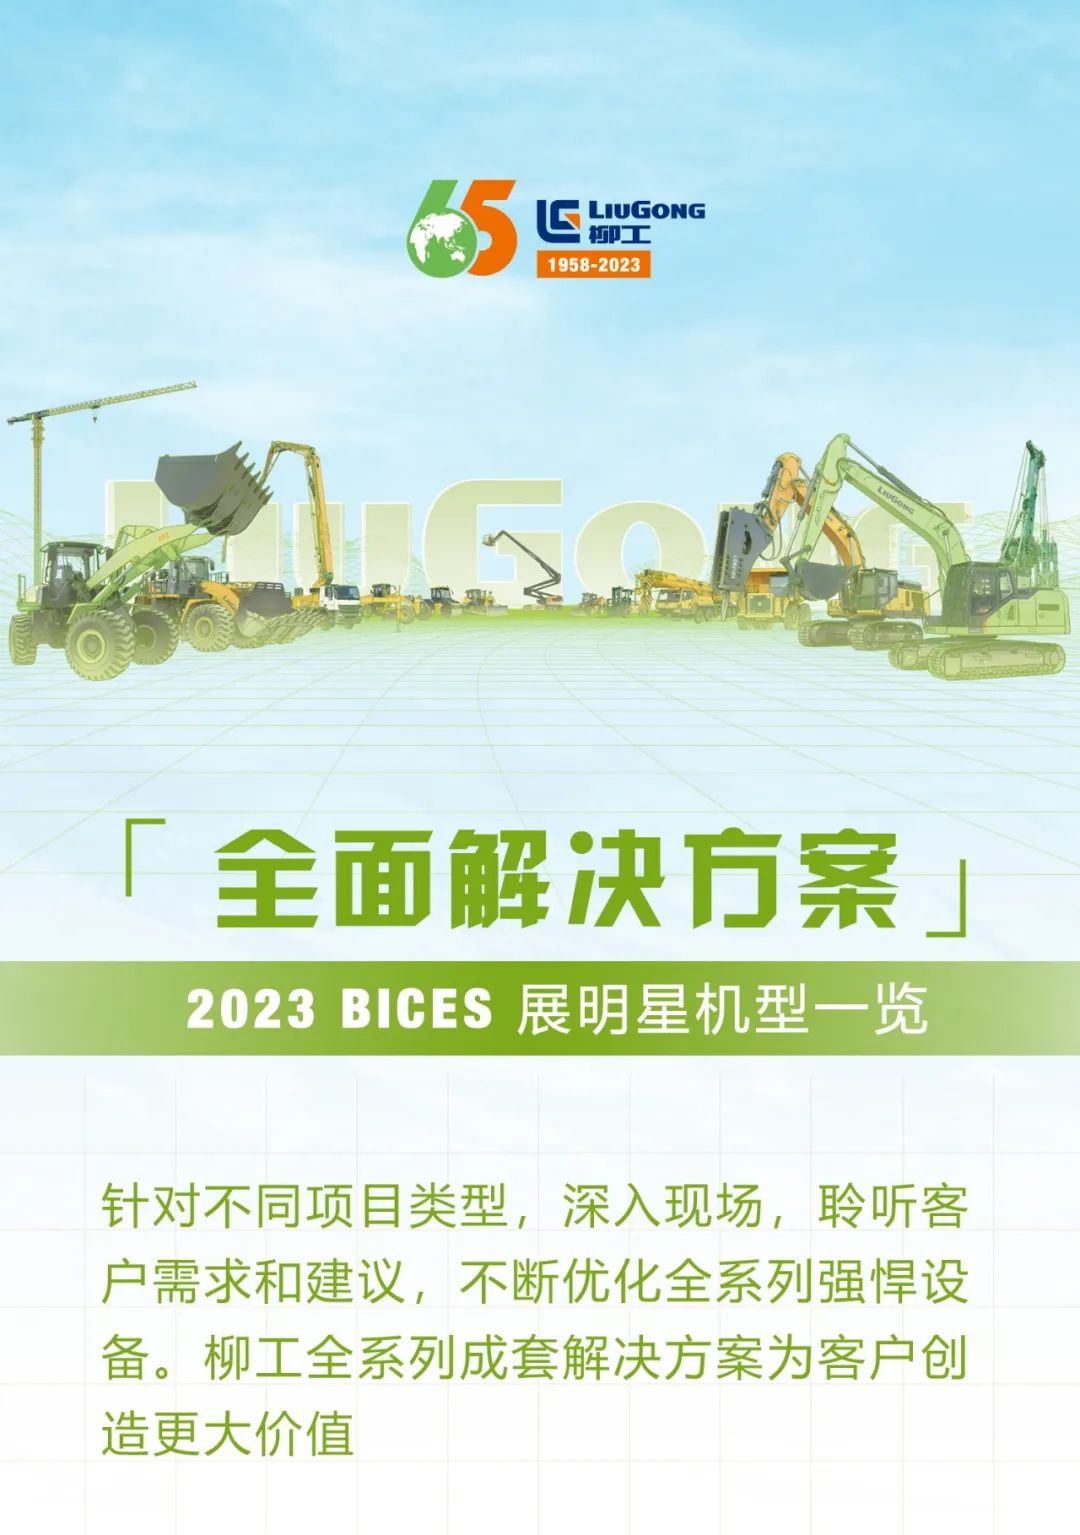 BICES 2023 | Liugong's comprehensive solutions bring unlimited possibilities to customers